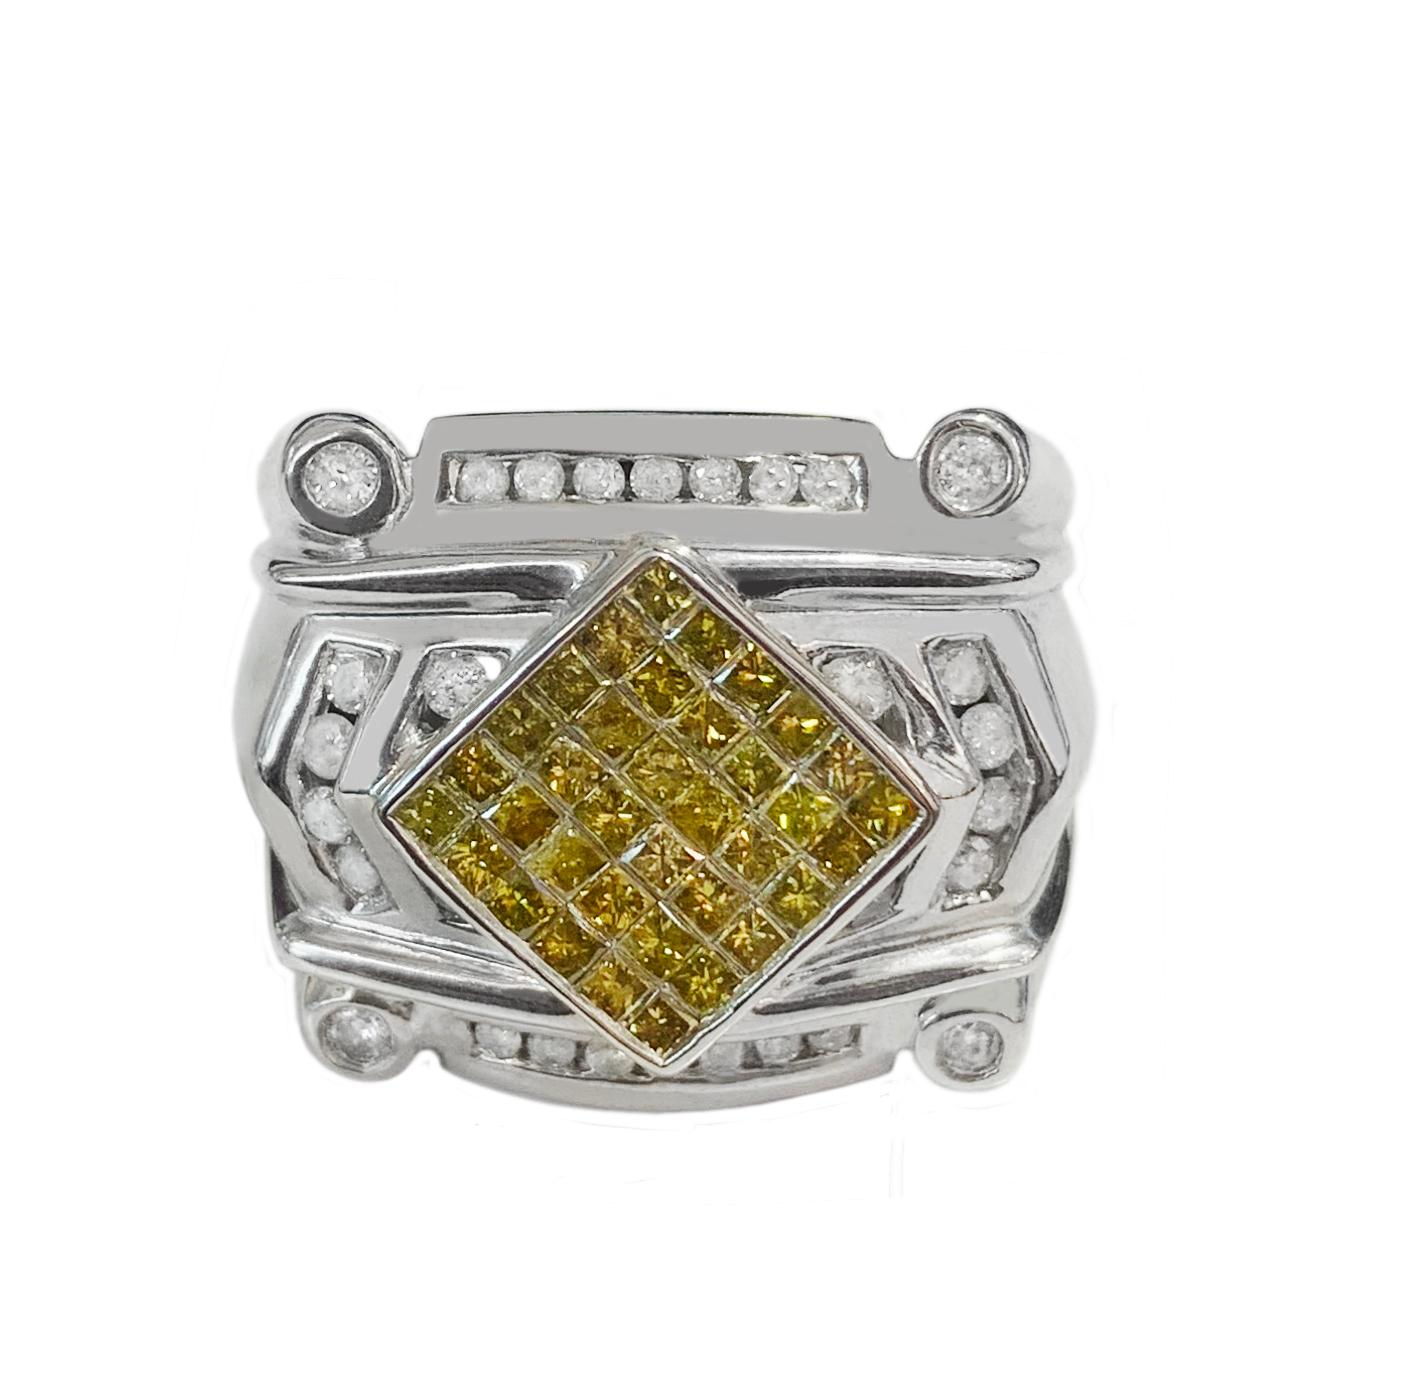 -Custom made

-14k White gold

-Ring size: 10

-Weight: 16gr

-Ornament dimension: 0.8x0.9”

-Diamonds: 2.00ct, SI clarity, G color